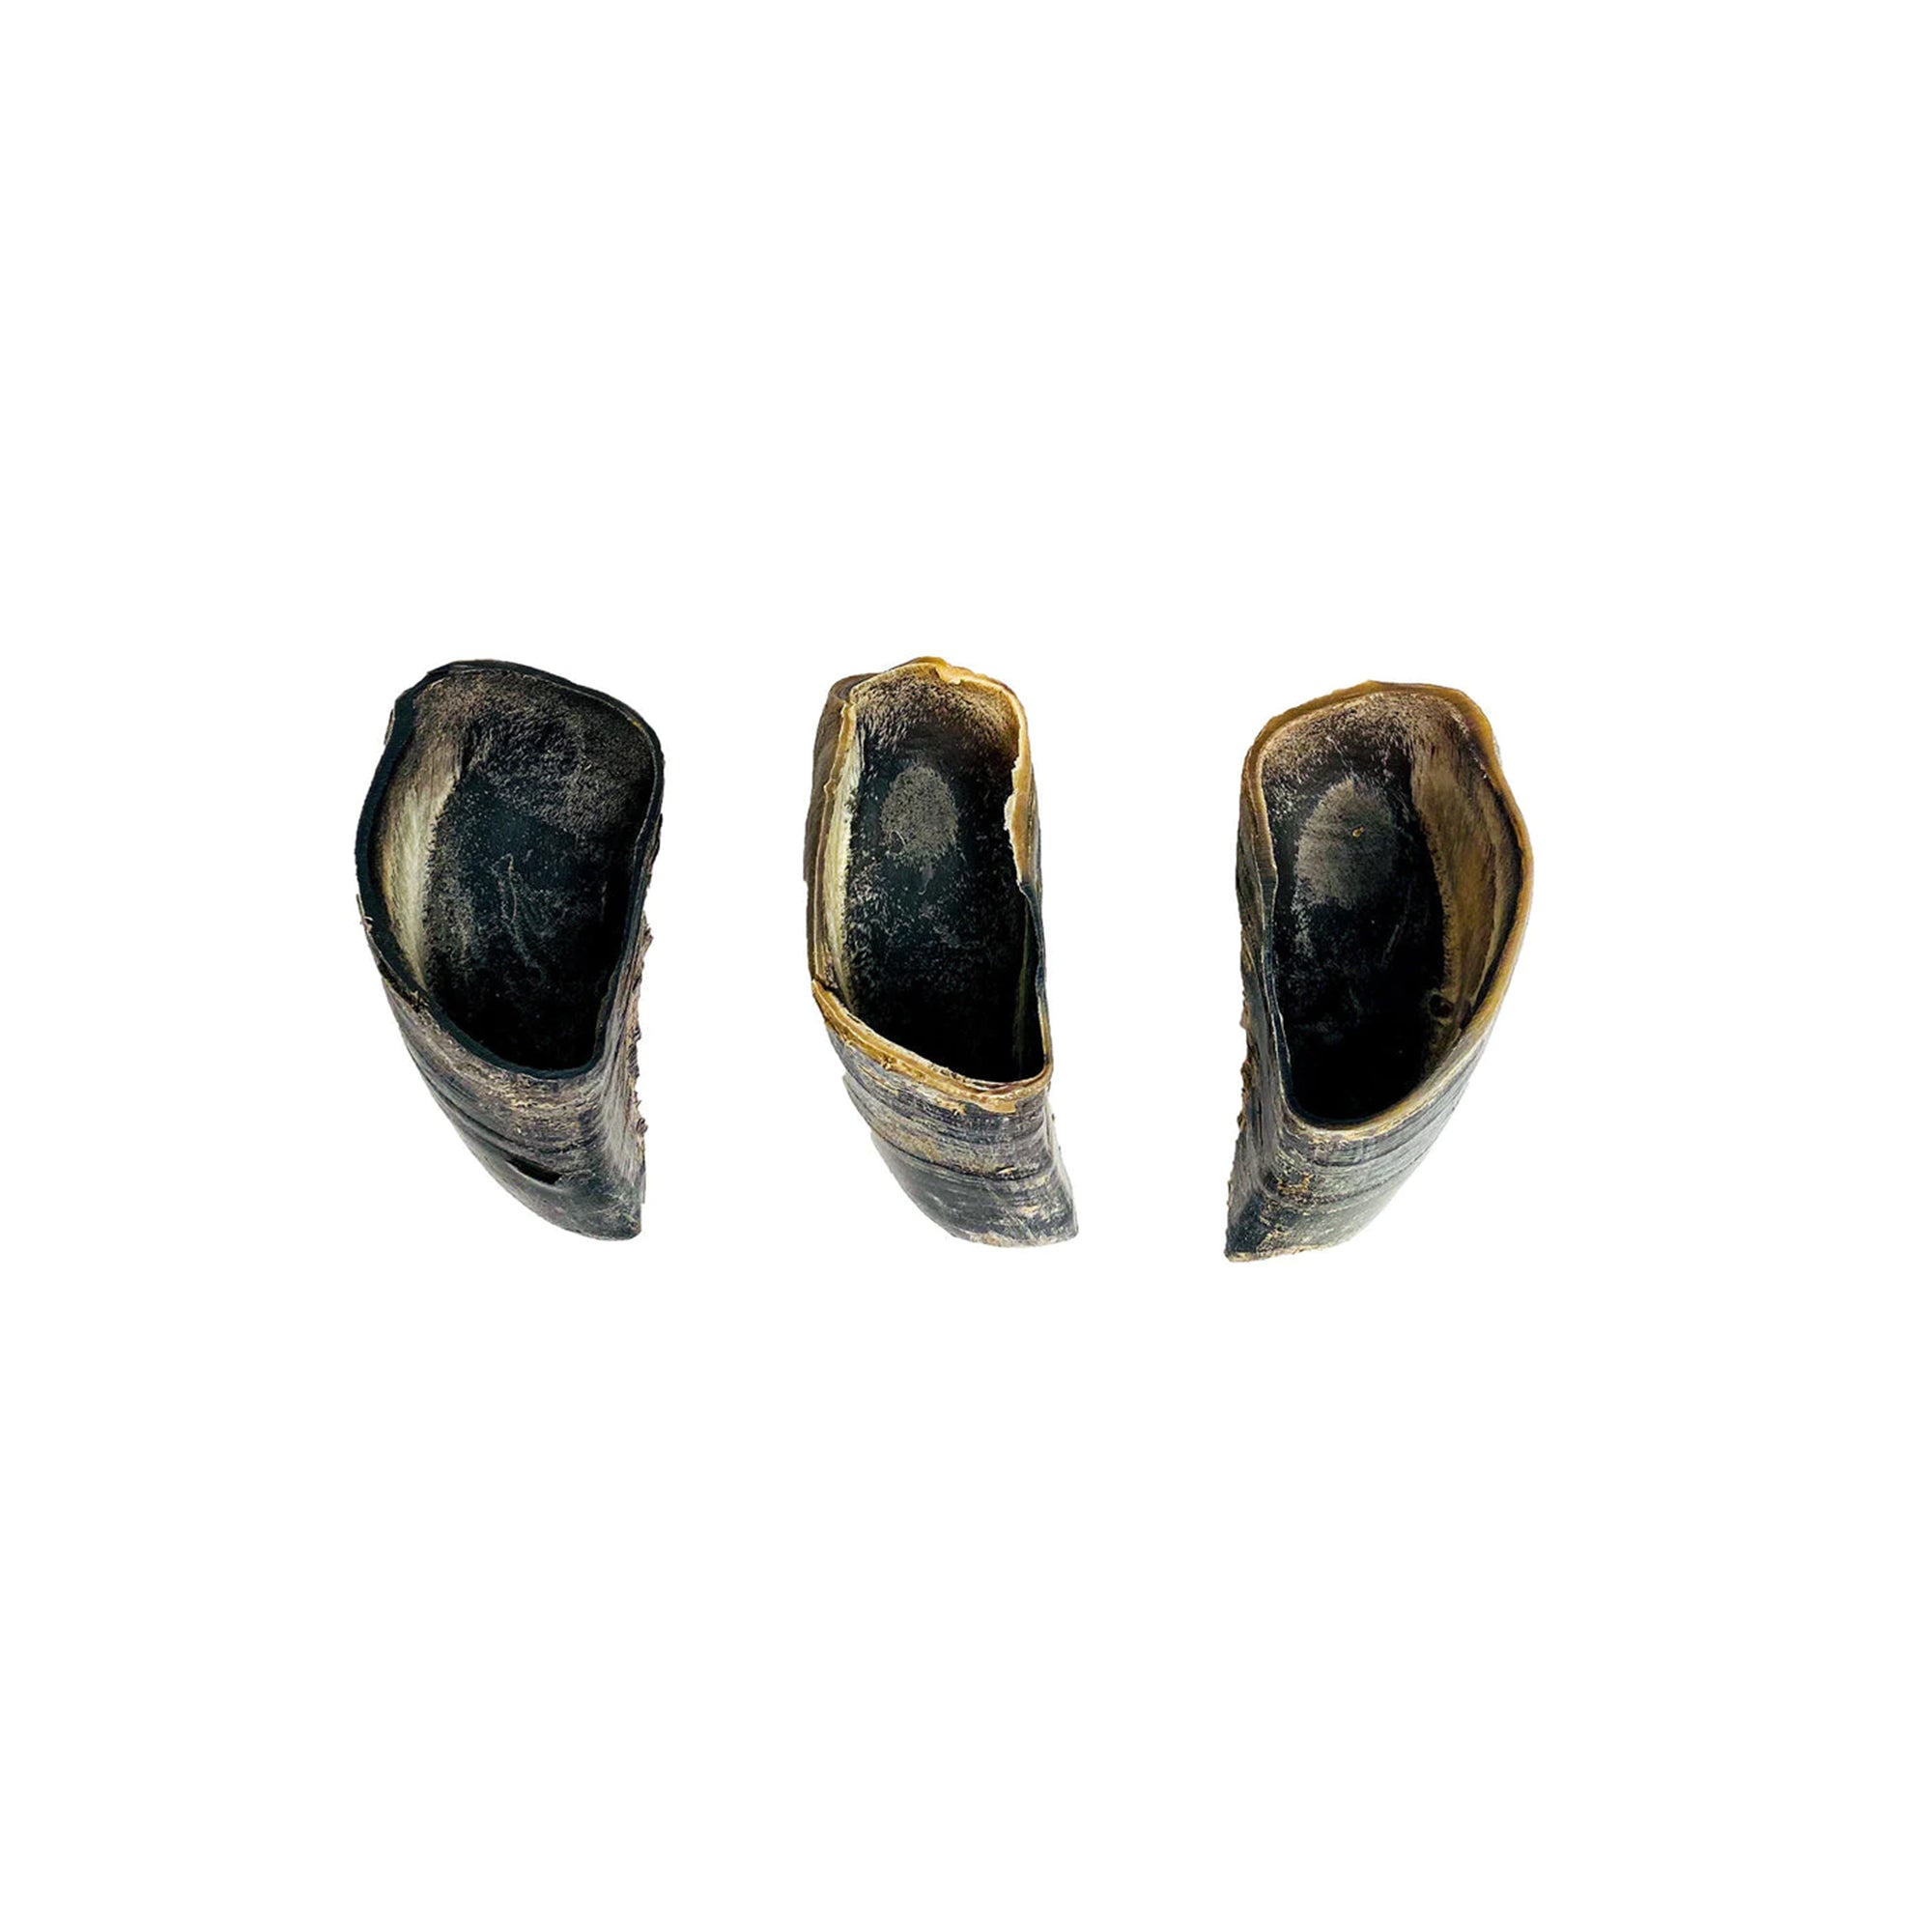 Cow Hooves - 6 and 12 Count - Cow Hooves - 6 and 12 Count - K9warehouse.com